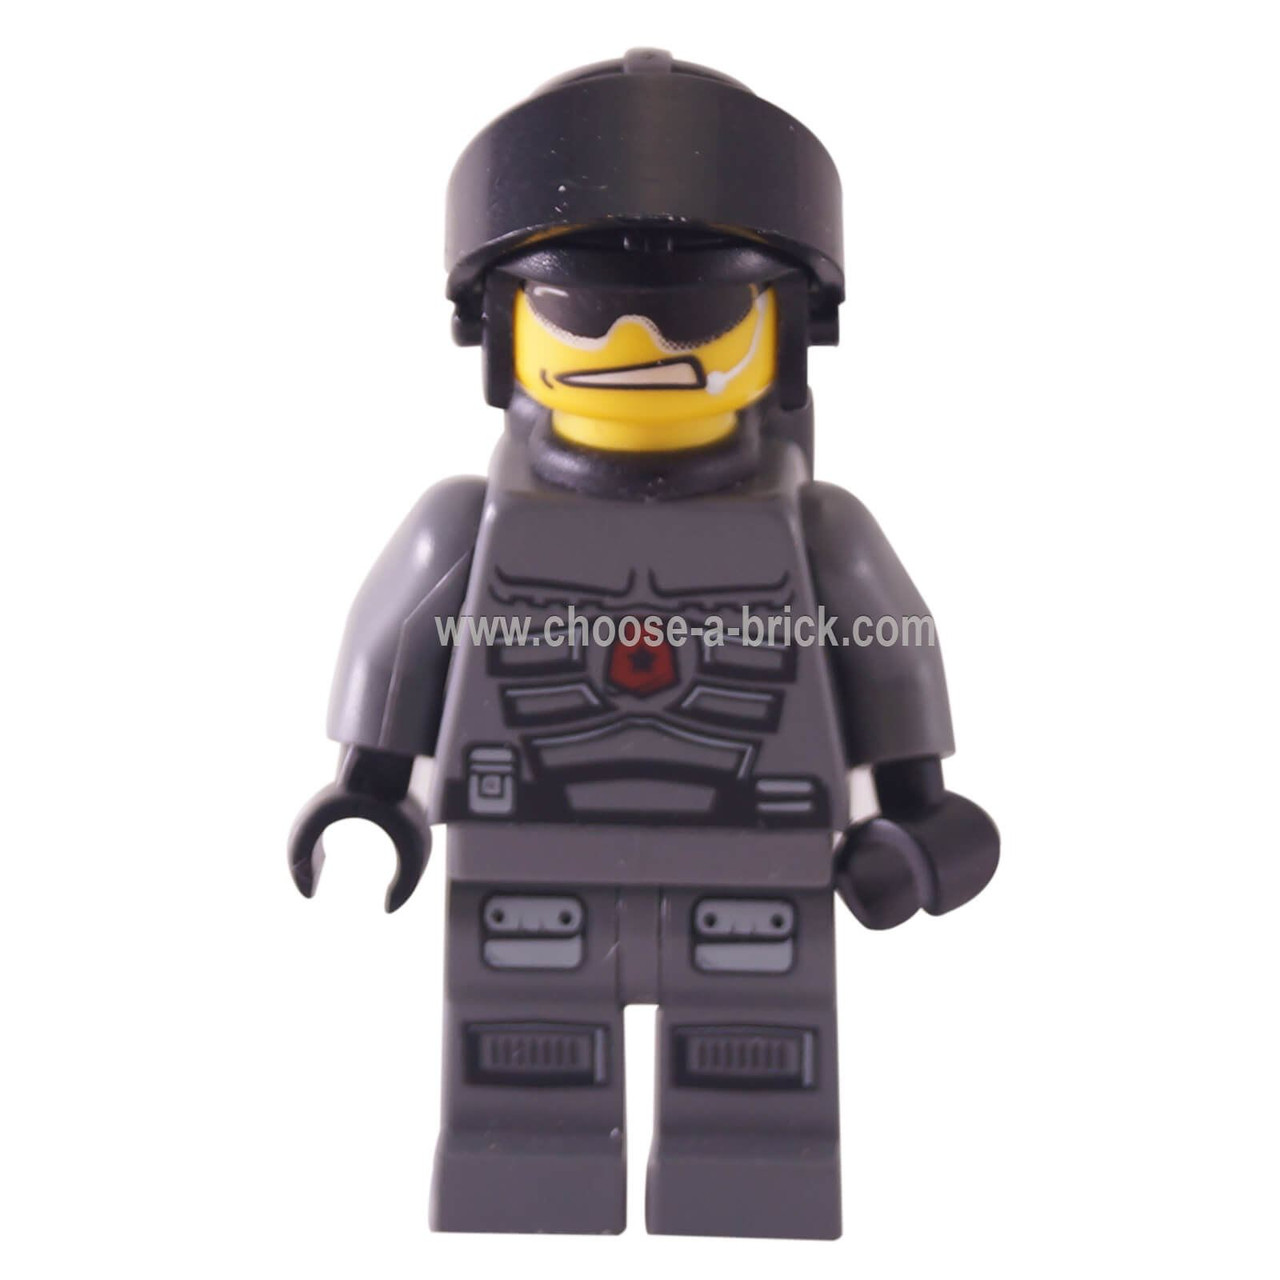 Space Police 3 Officer 10 5979